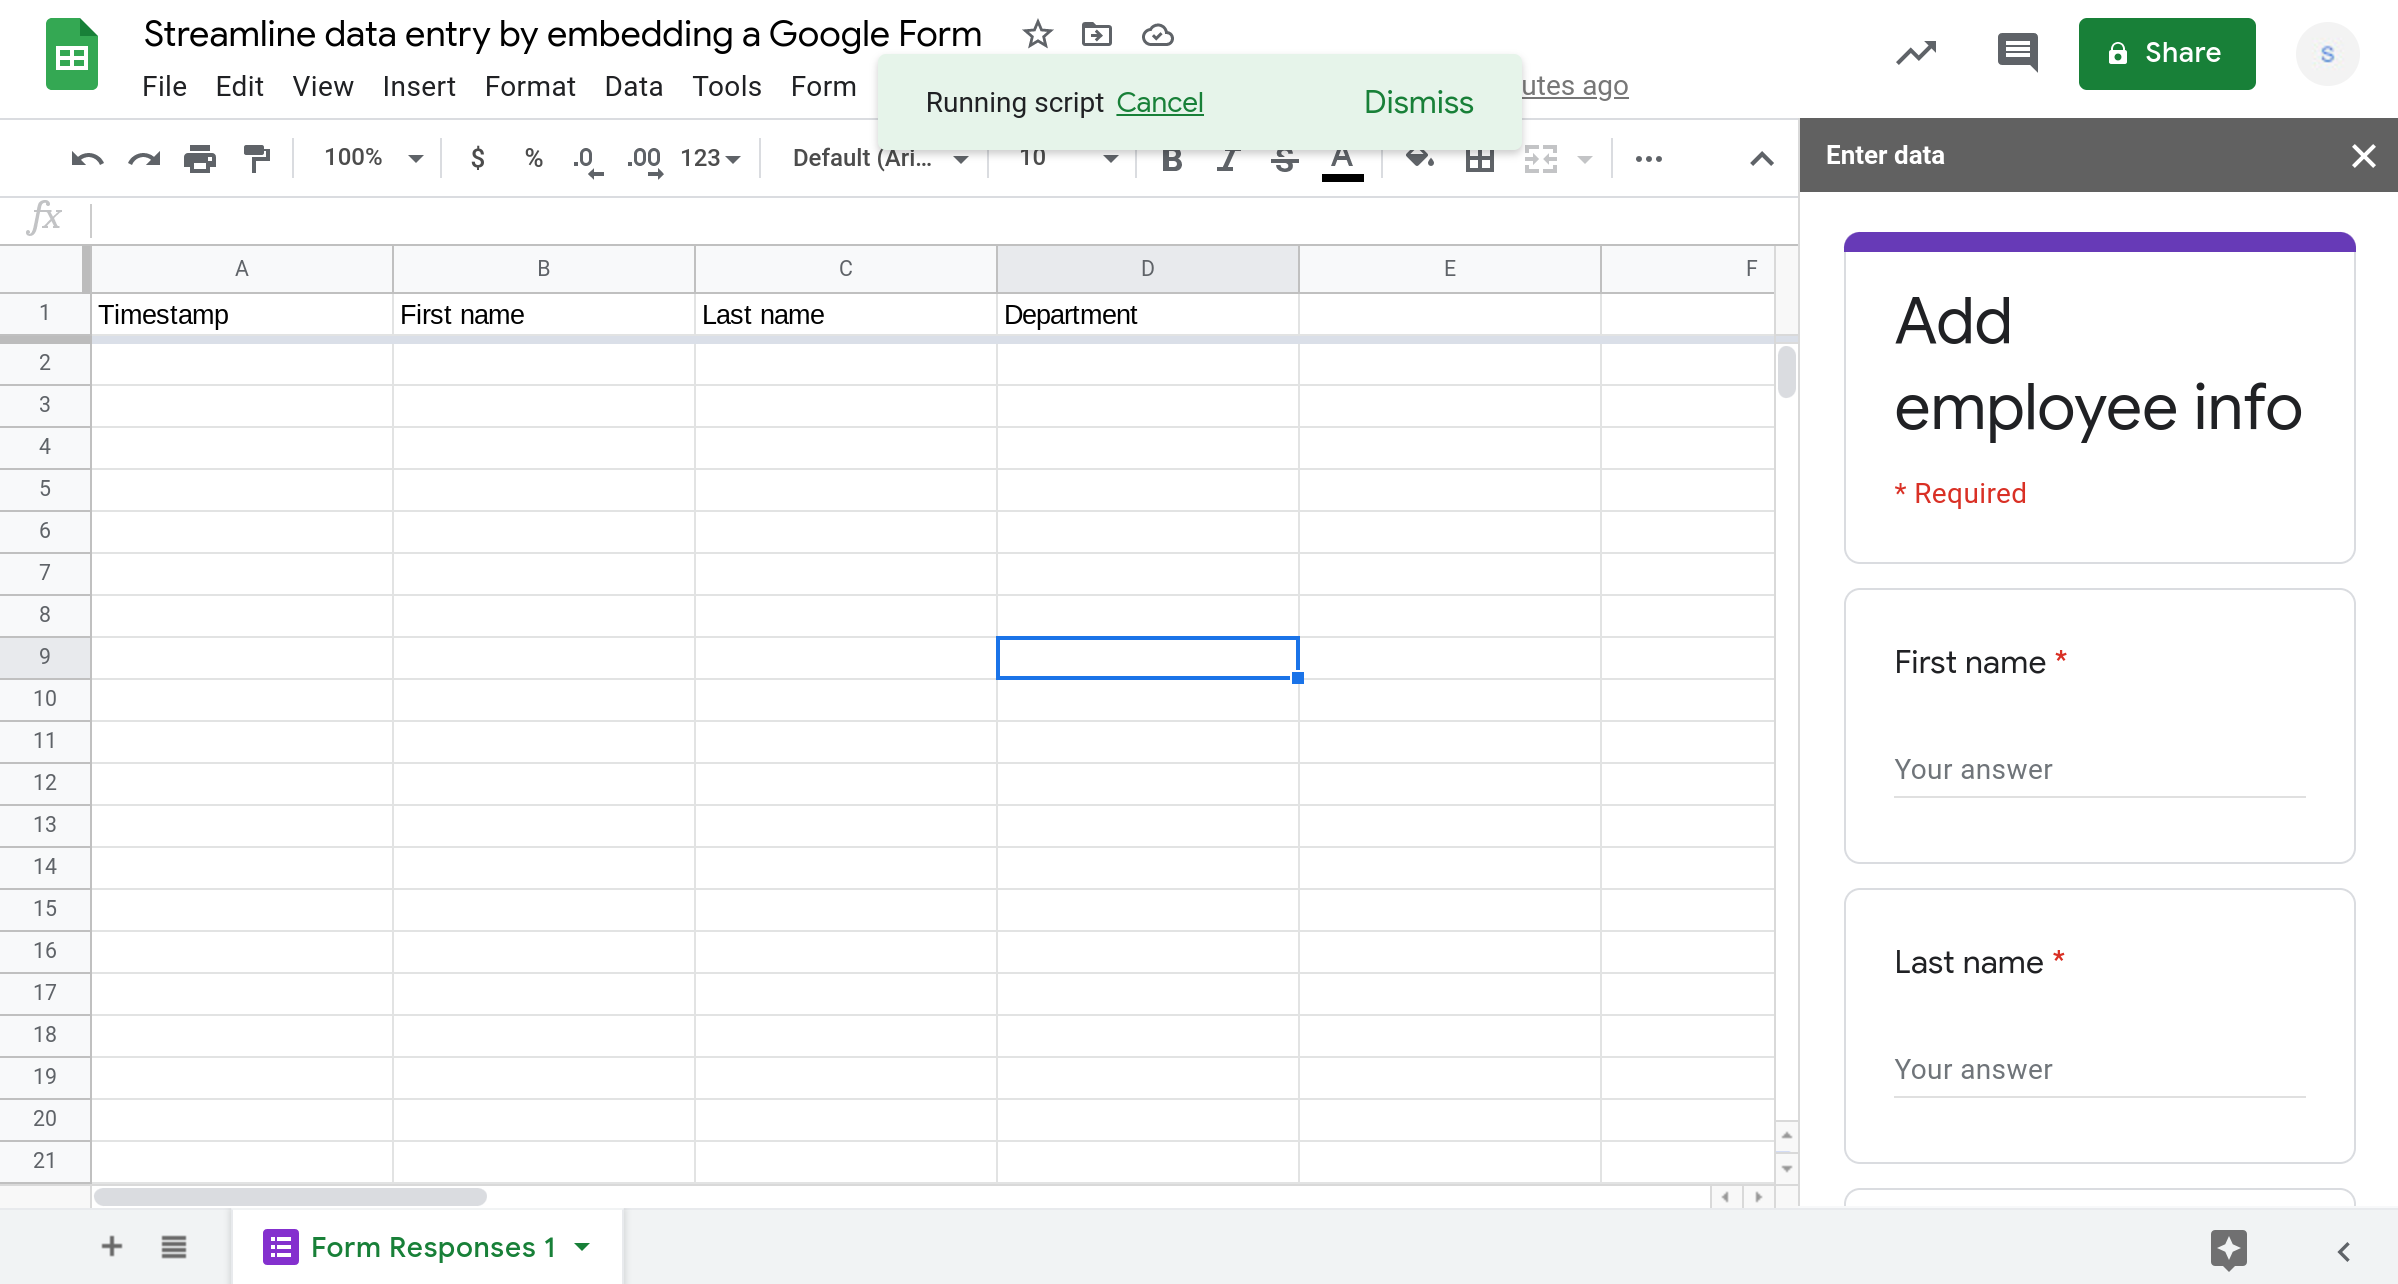 Screenshot of a Google Sheets spreadsheet that shows a Google Form embedded in a sidebar.